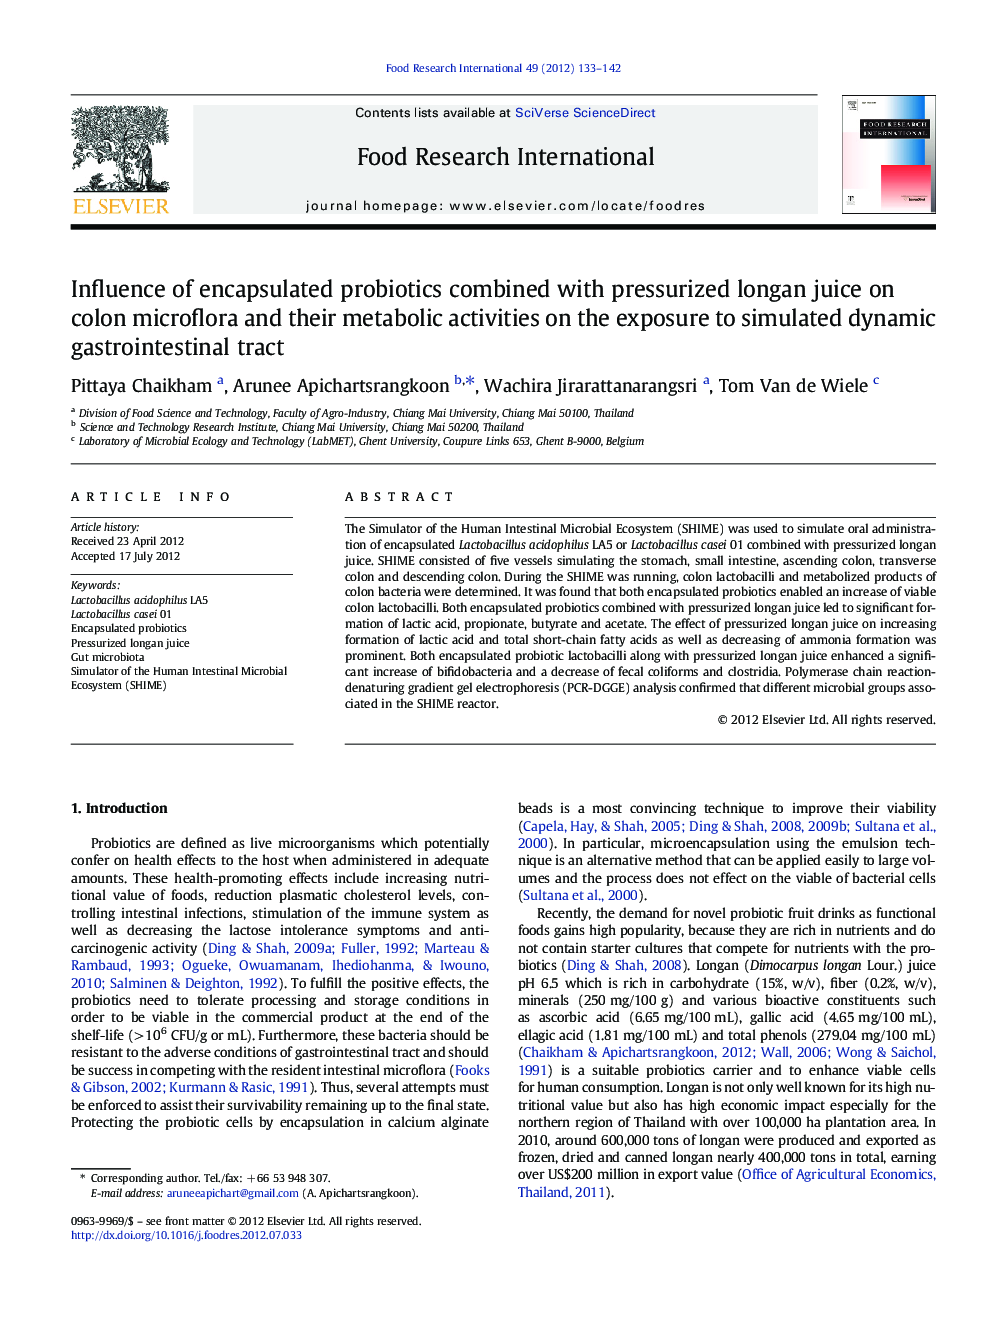 Influence of encapsulated probiotics combined with pressurized longan juice on colon microflora and their metabolic activities on the exposure to simulated dynamic gastrointestinal tract